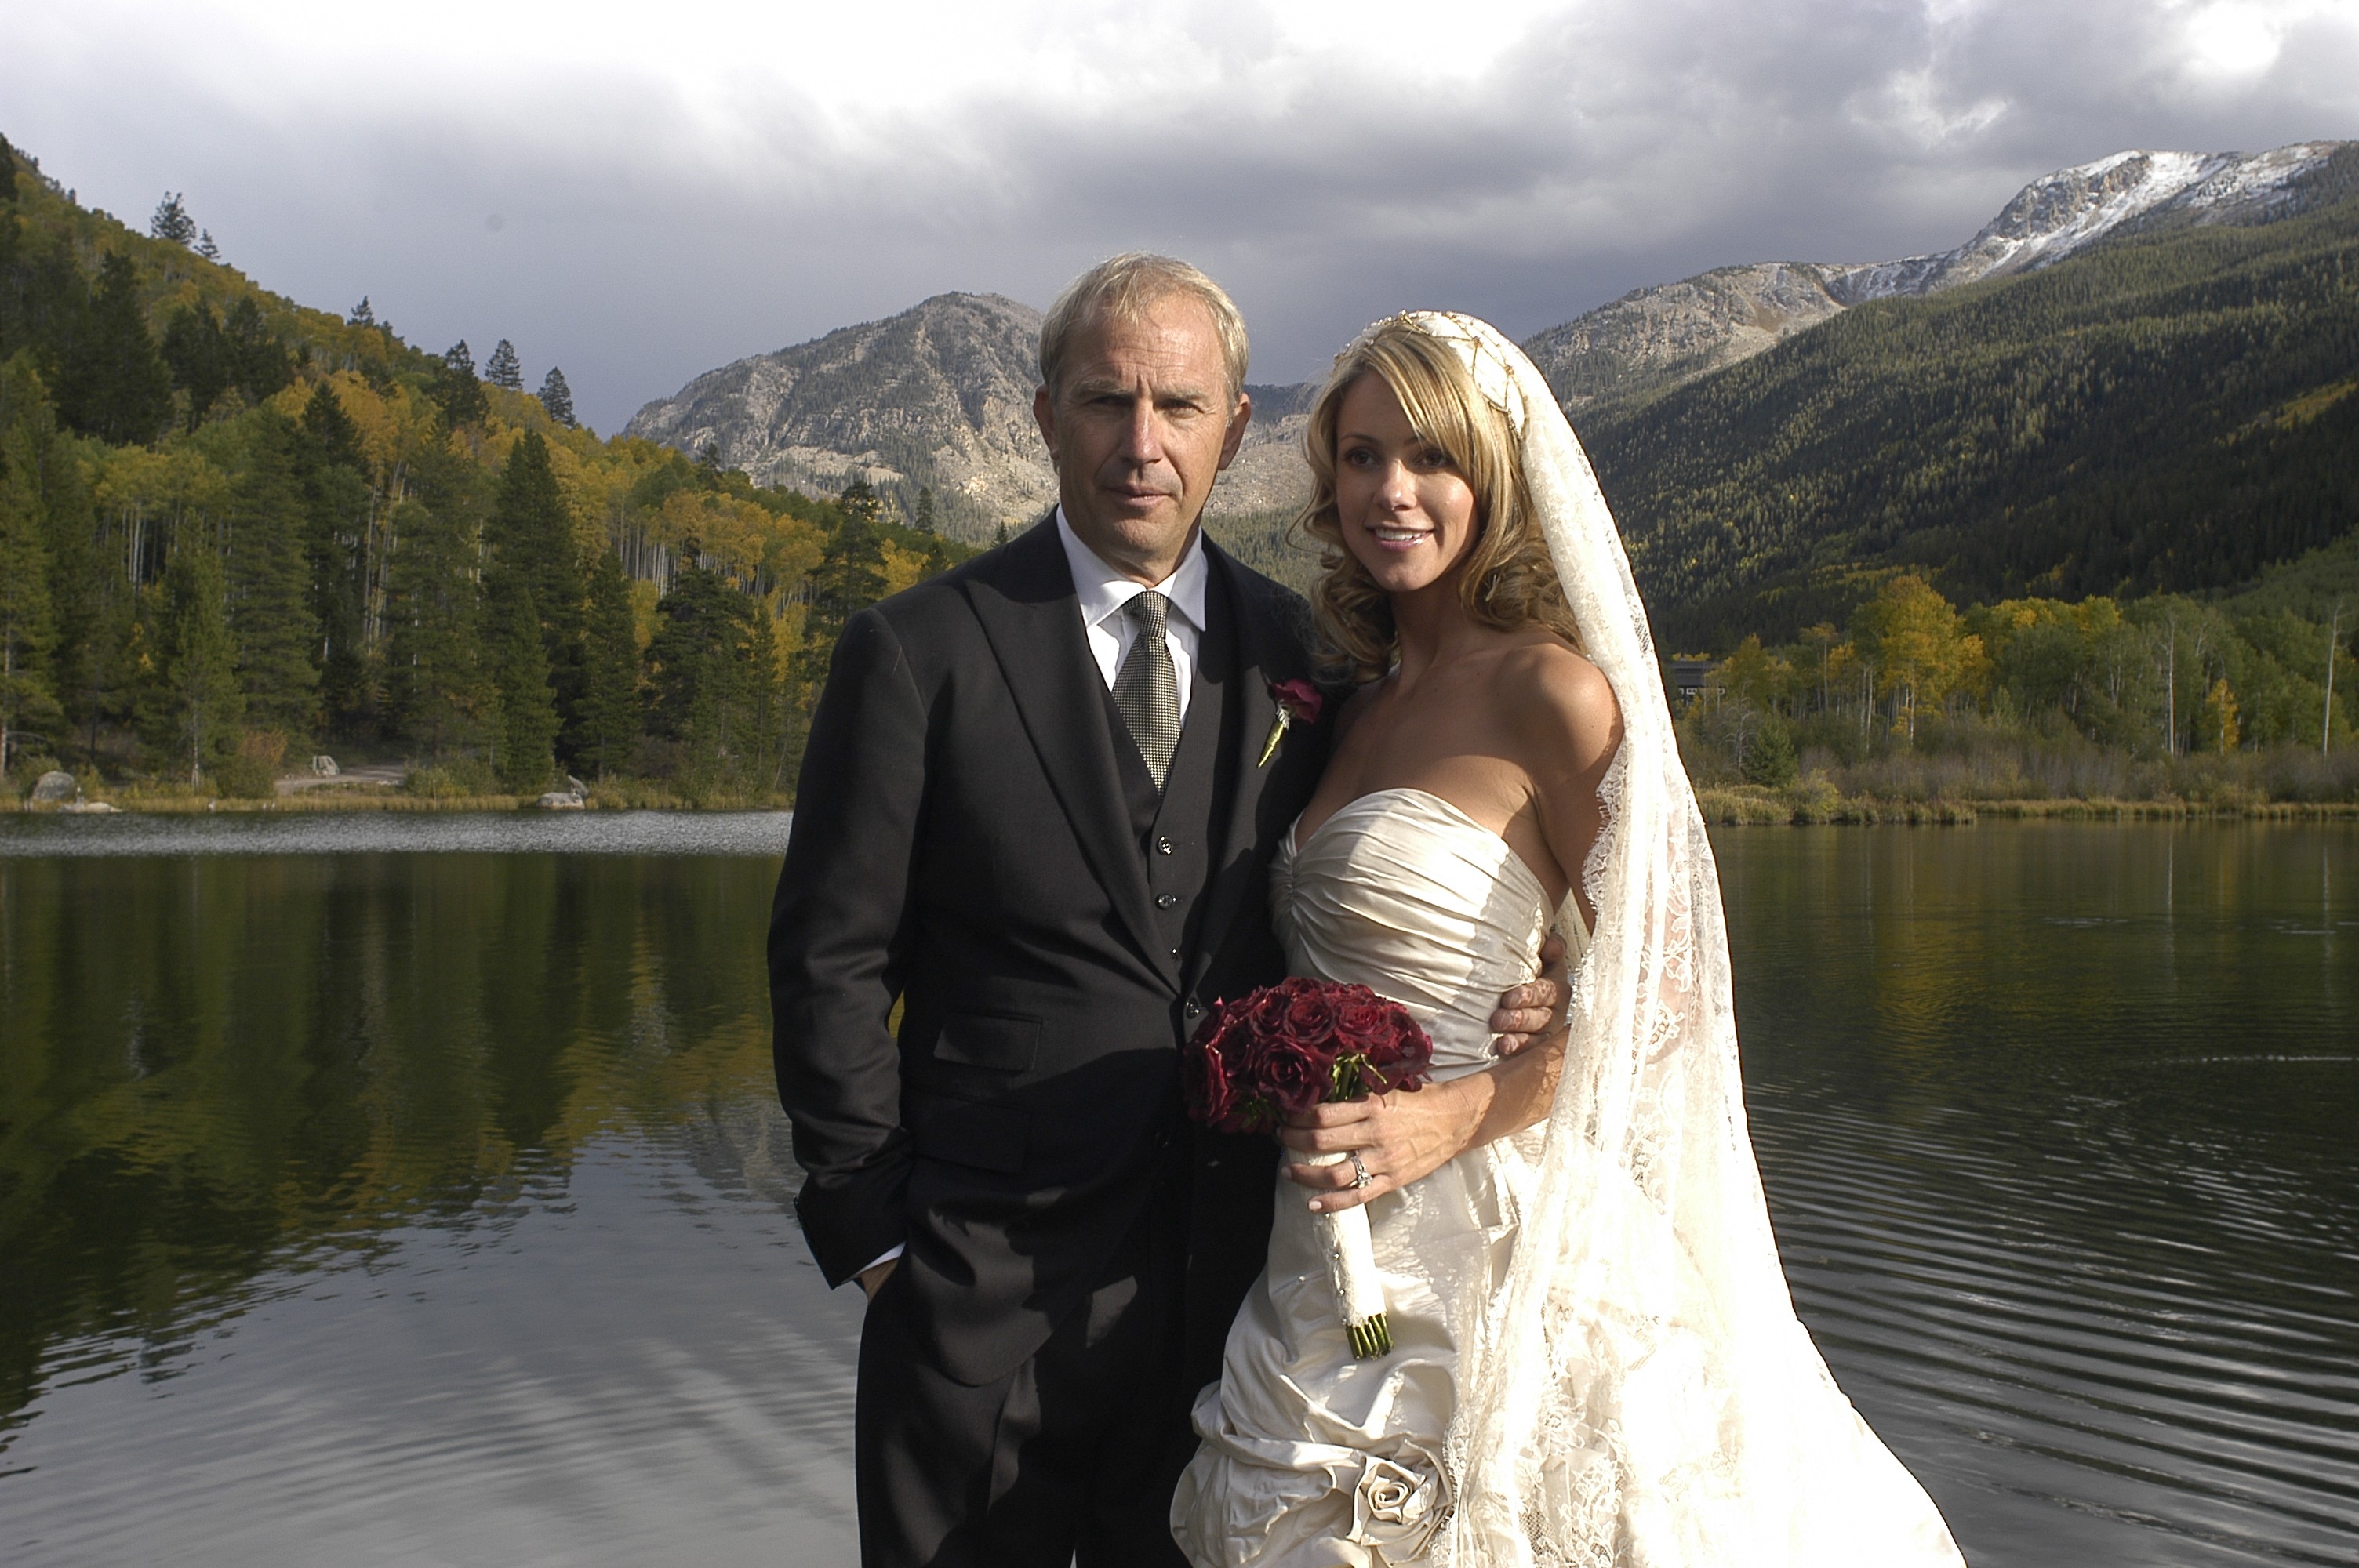 Actor Kevin Costner poses with his new wife Christine Baumgartner during their private wedding at his ranch in September 25, 2004 in Aspen, Colorado. | Source: Getty Images